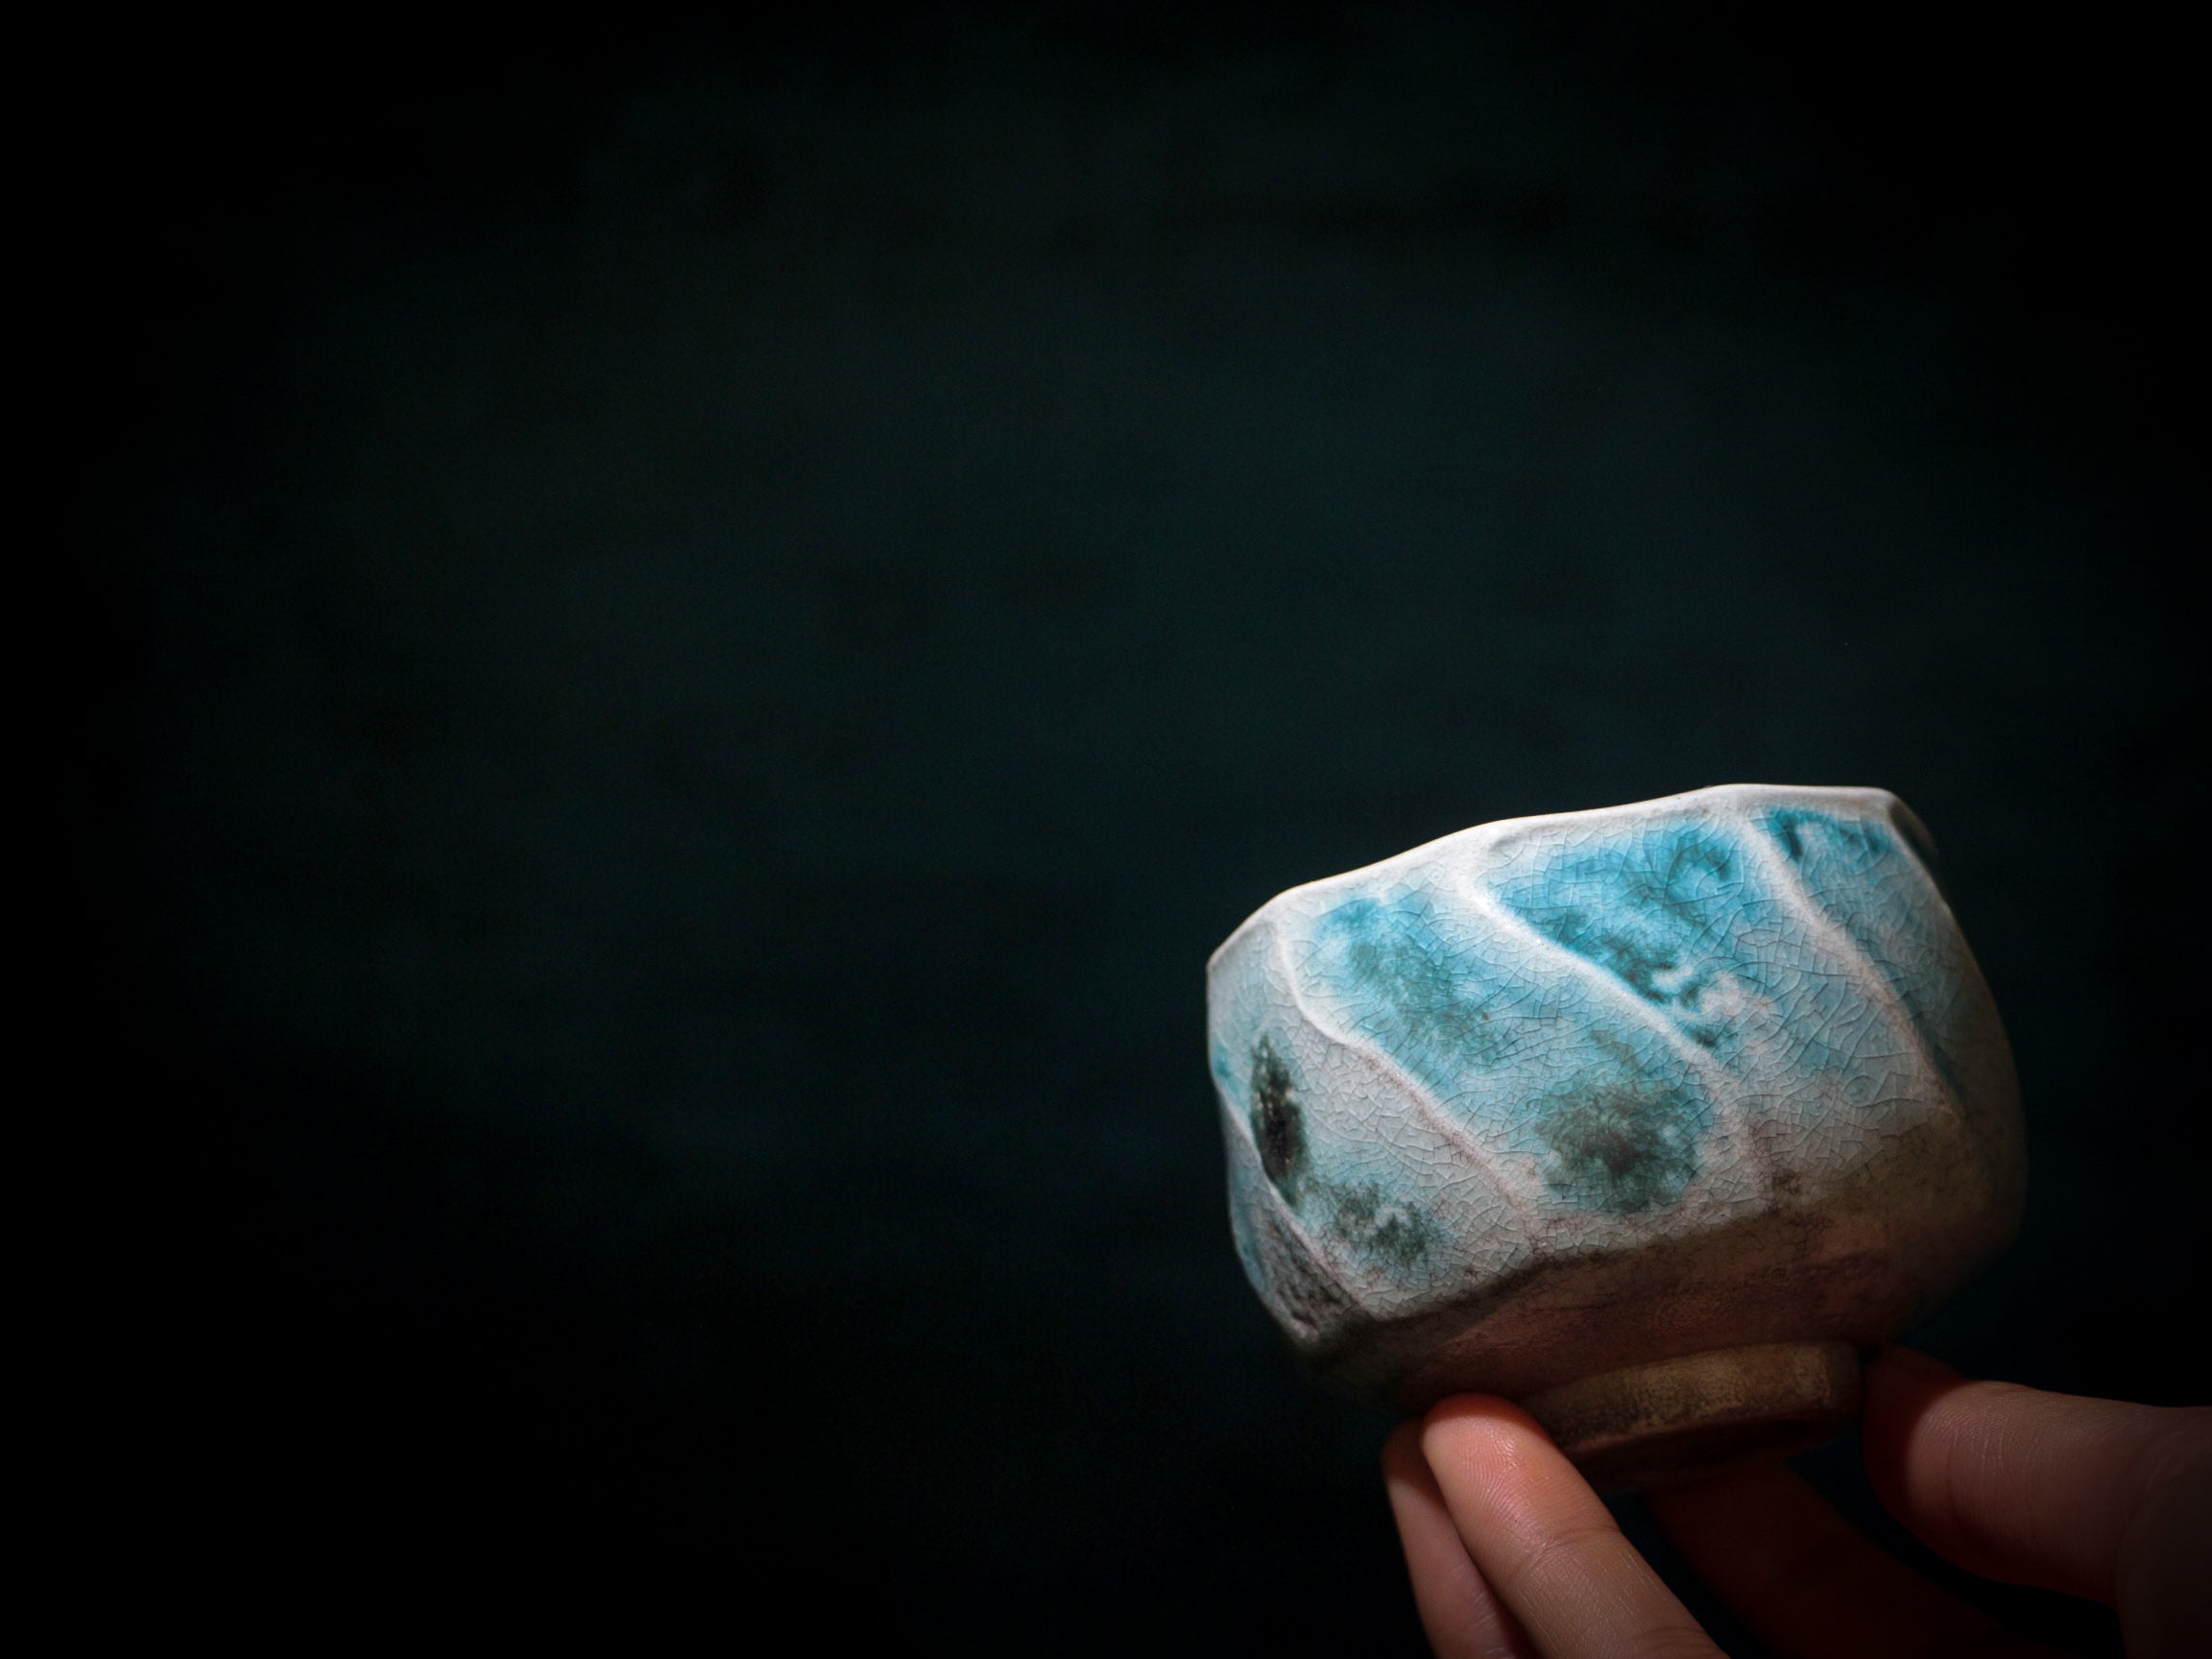 Faded Blue Woodfired Teacup